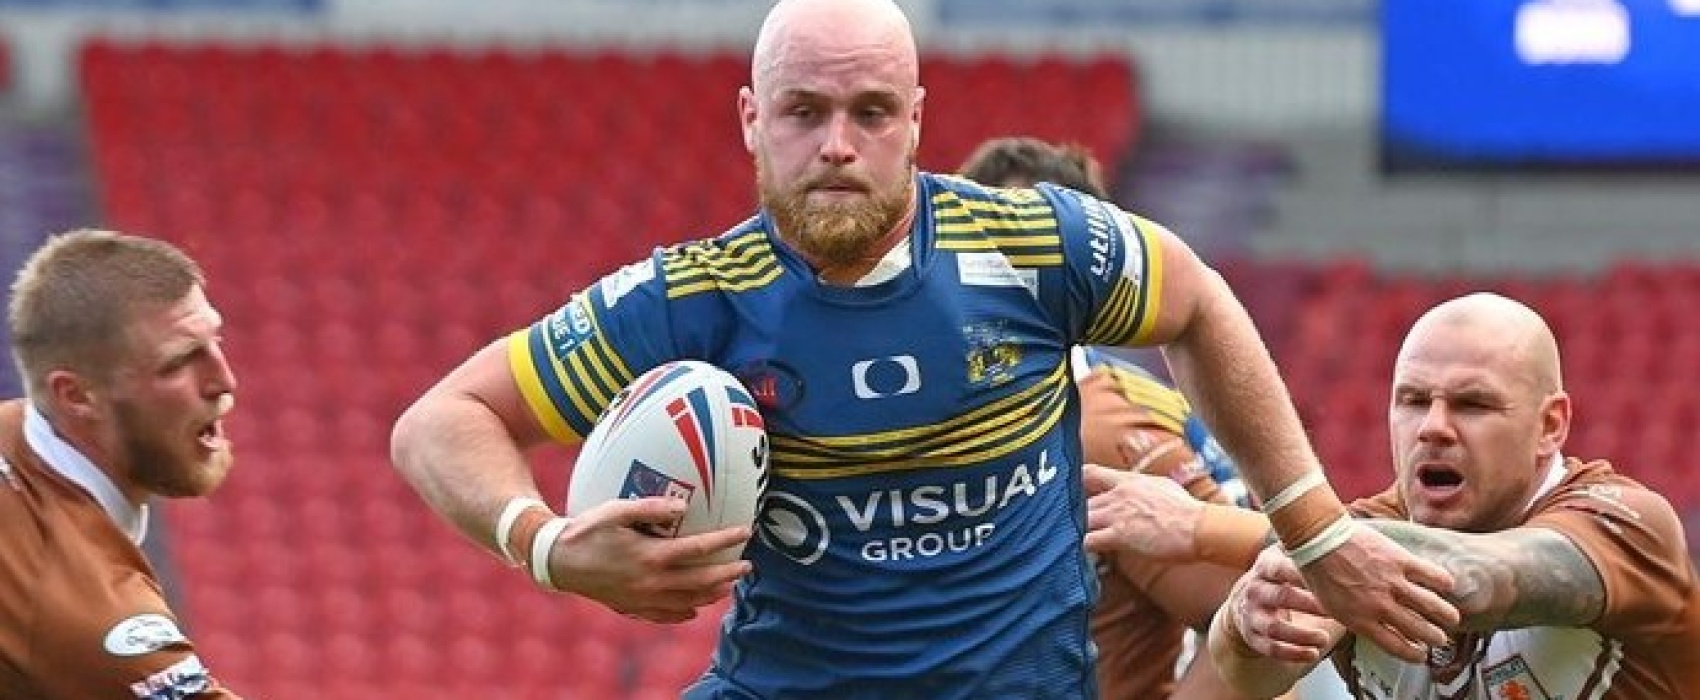 Liam Johnson makes South Yorkshire switch